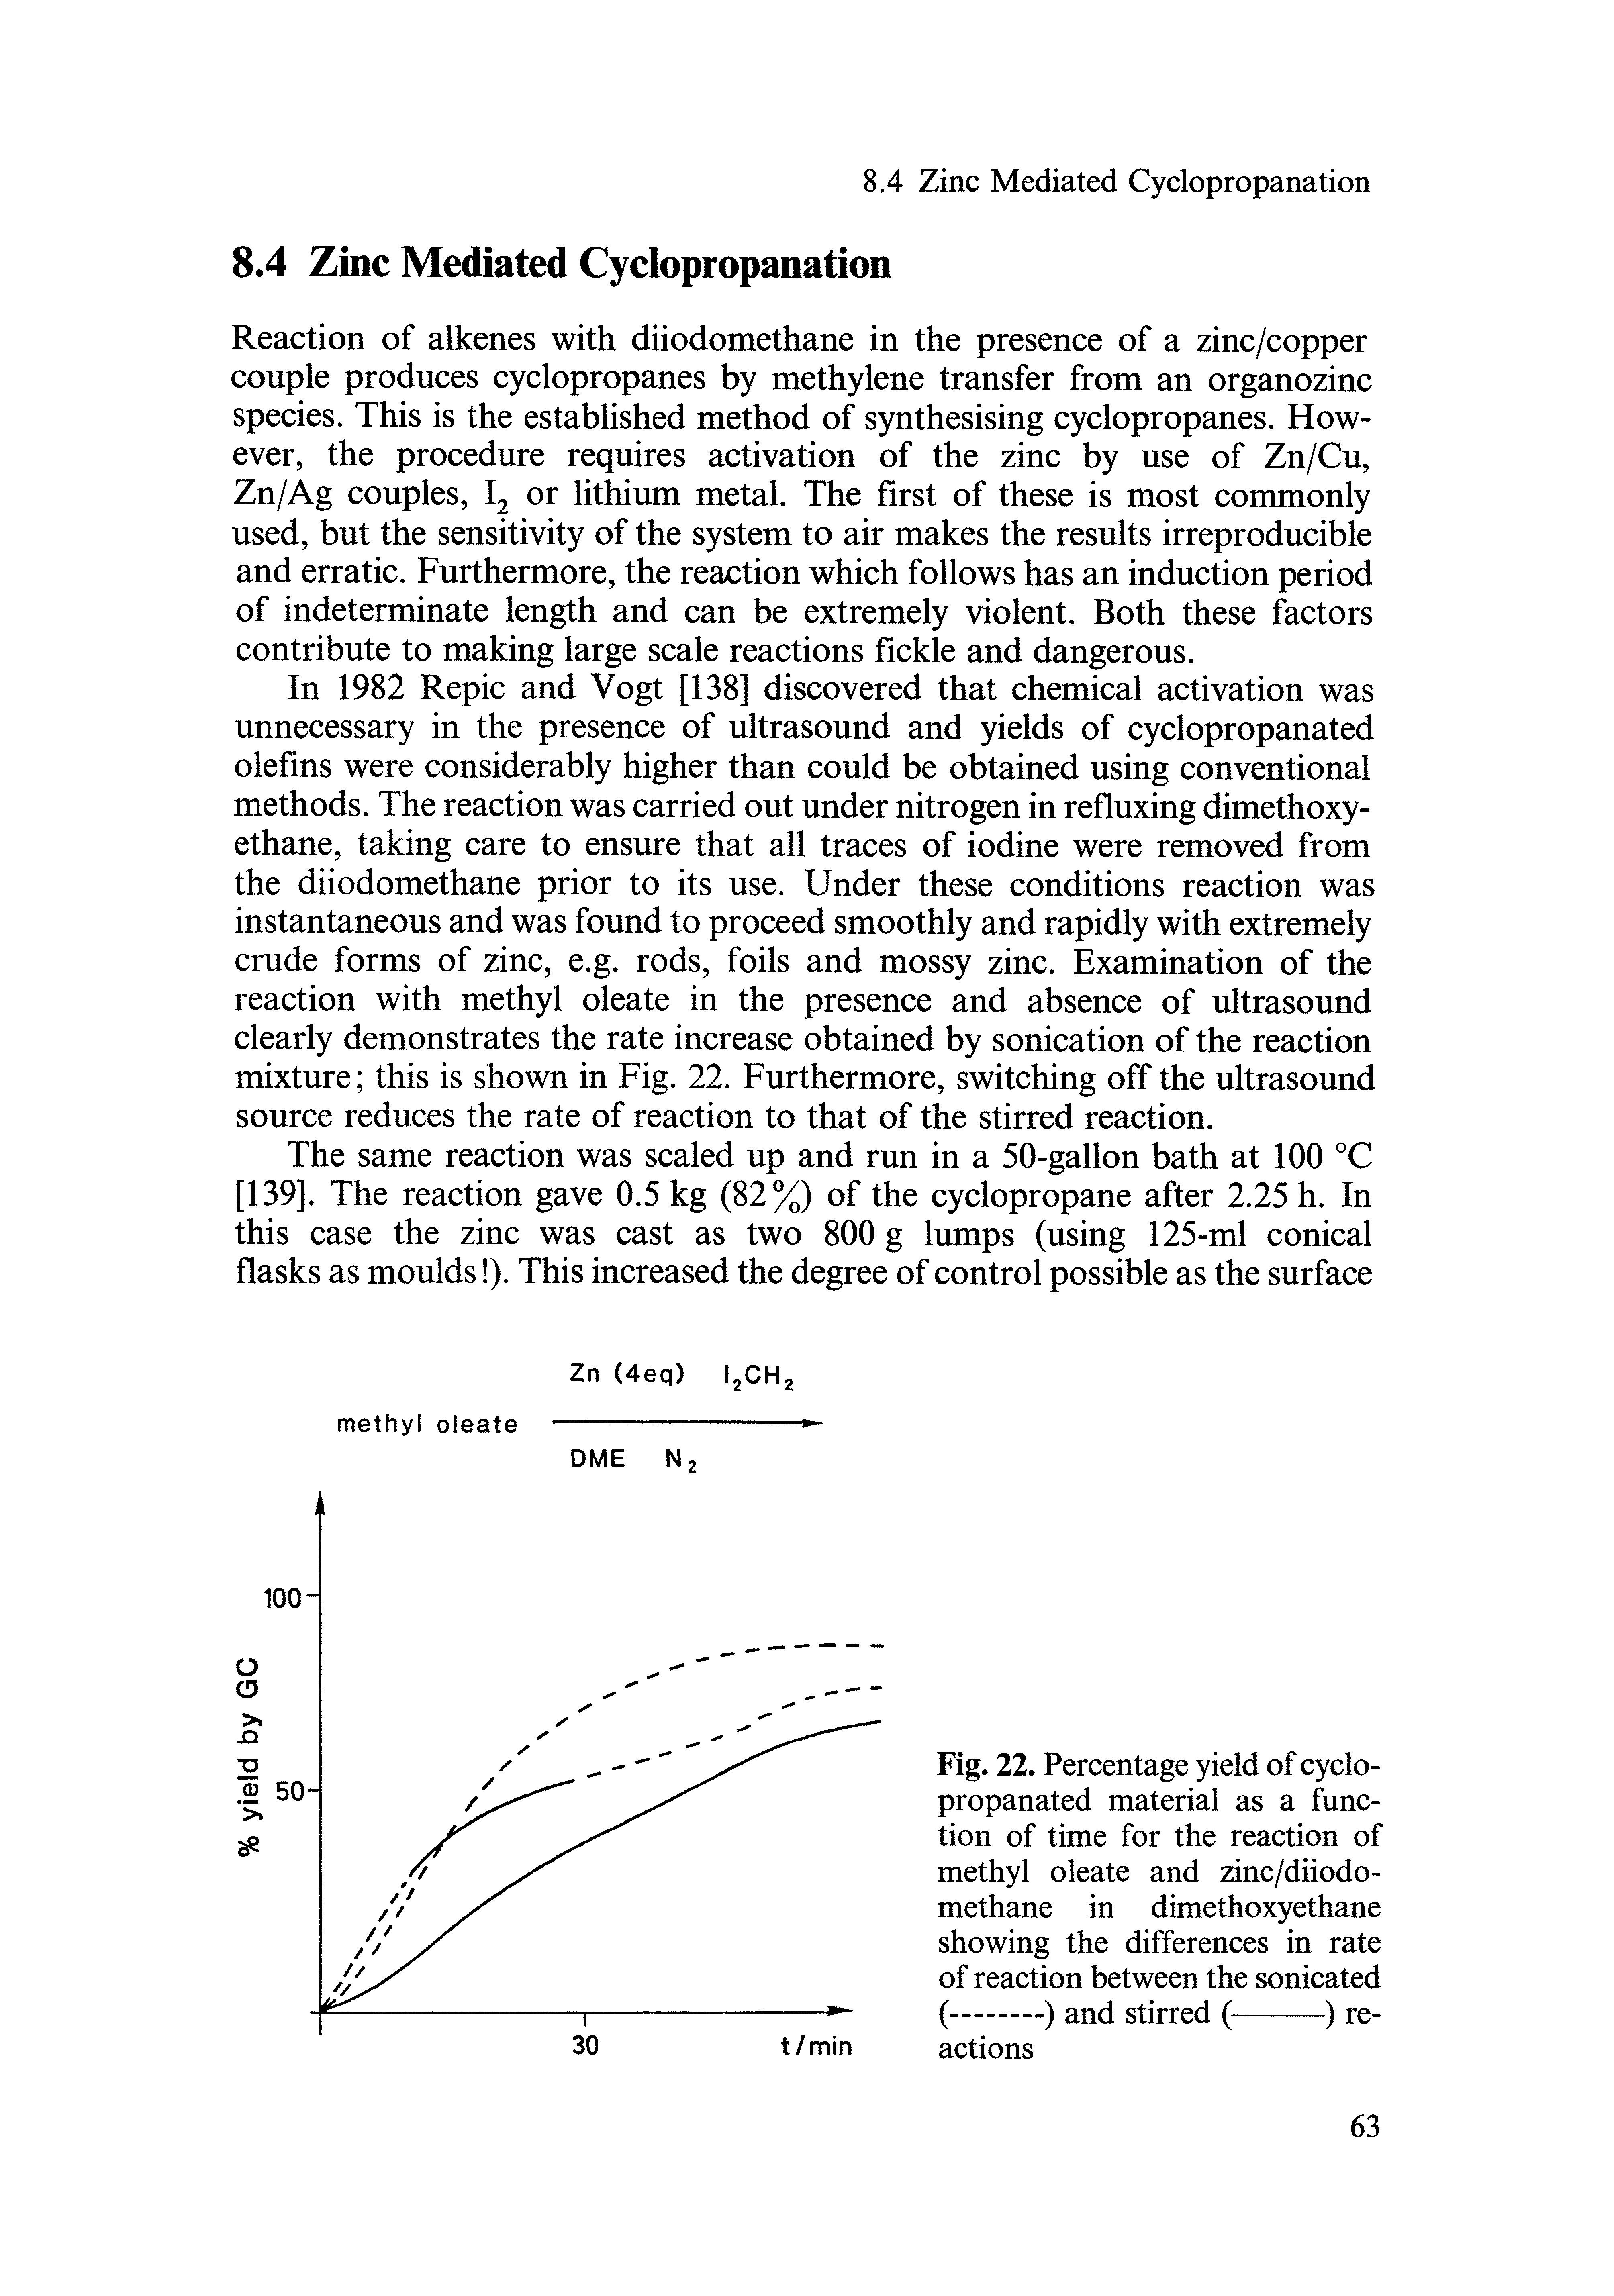 Fig. 22. Percentage yield of cyclopropanated material as a function of time for the reaction of methyl oleate and zinc/diiodo-methane in dimethoxyethane showing the differences in rate of reaction between the sonicated (.) and stirred (----) re-...